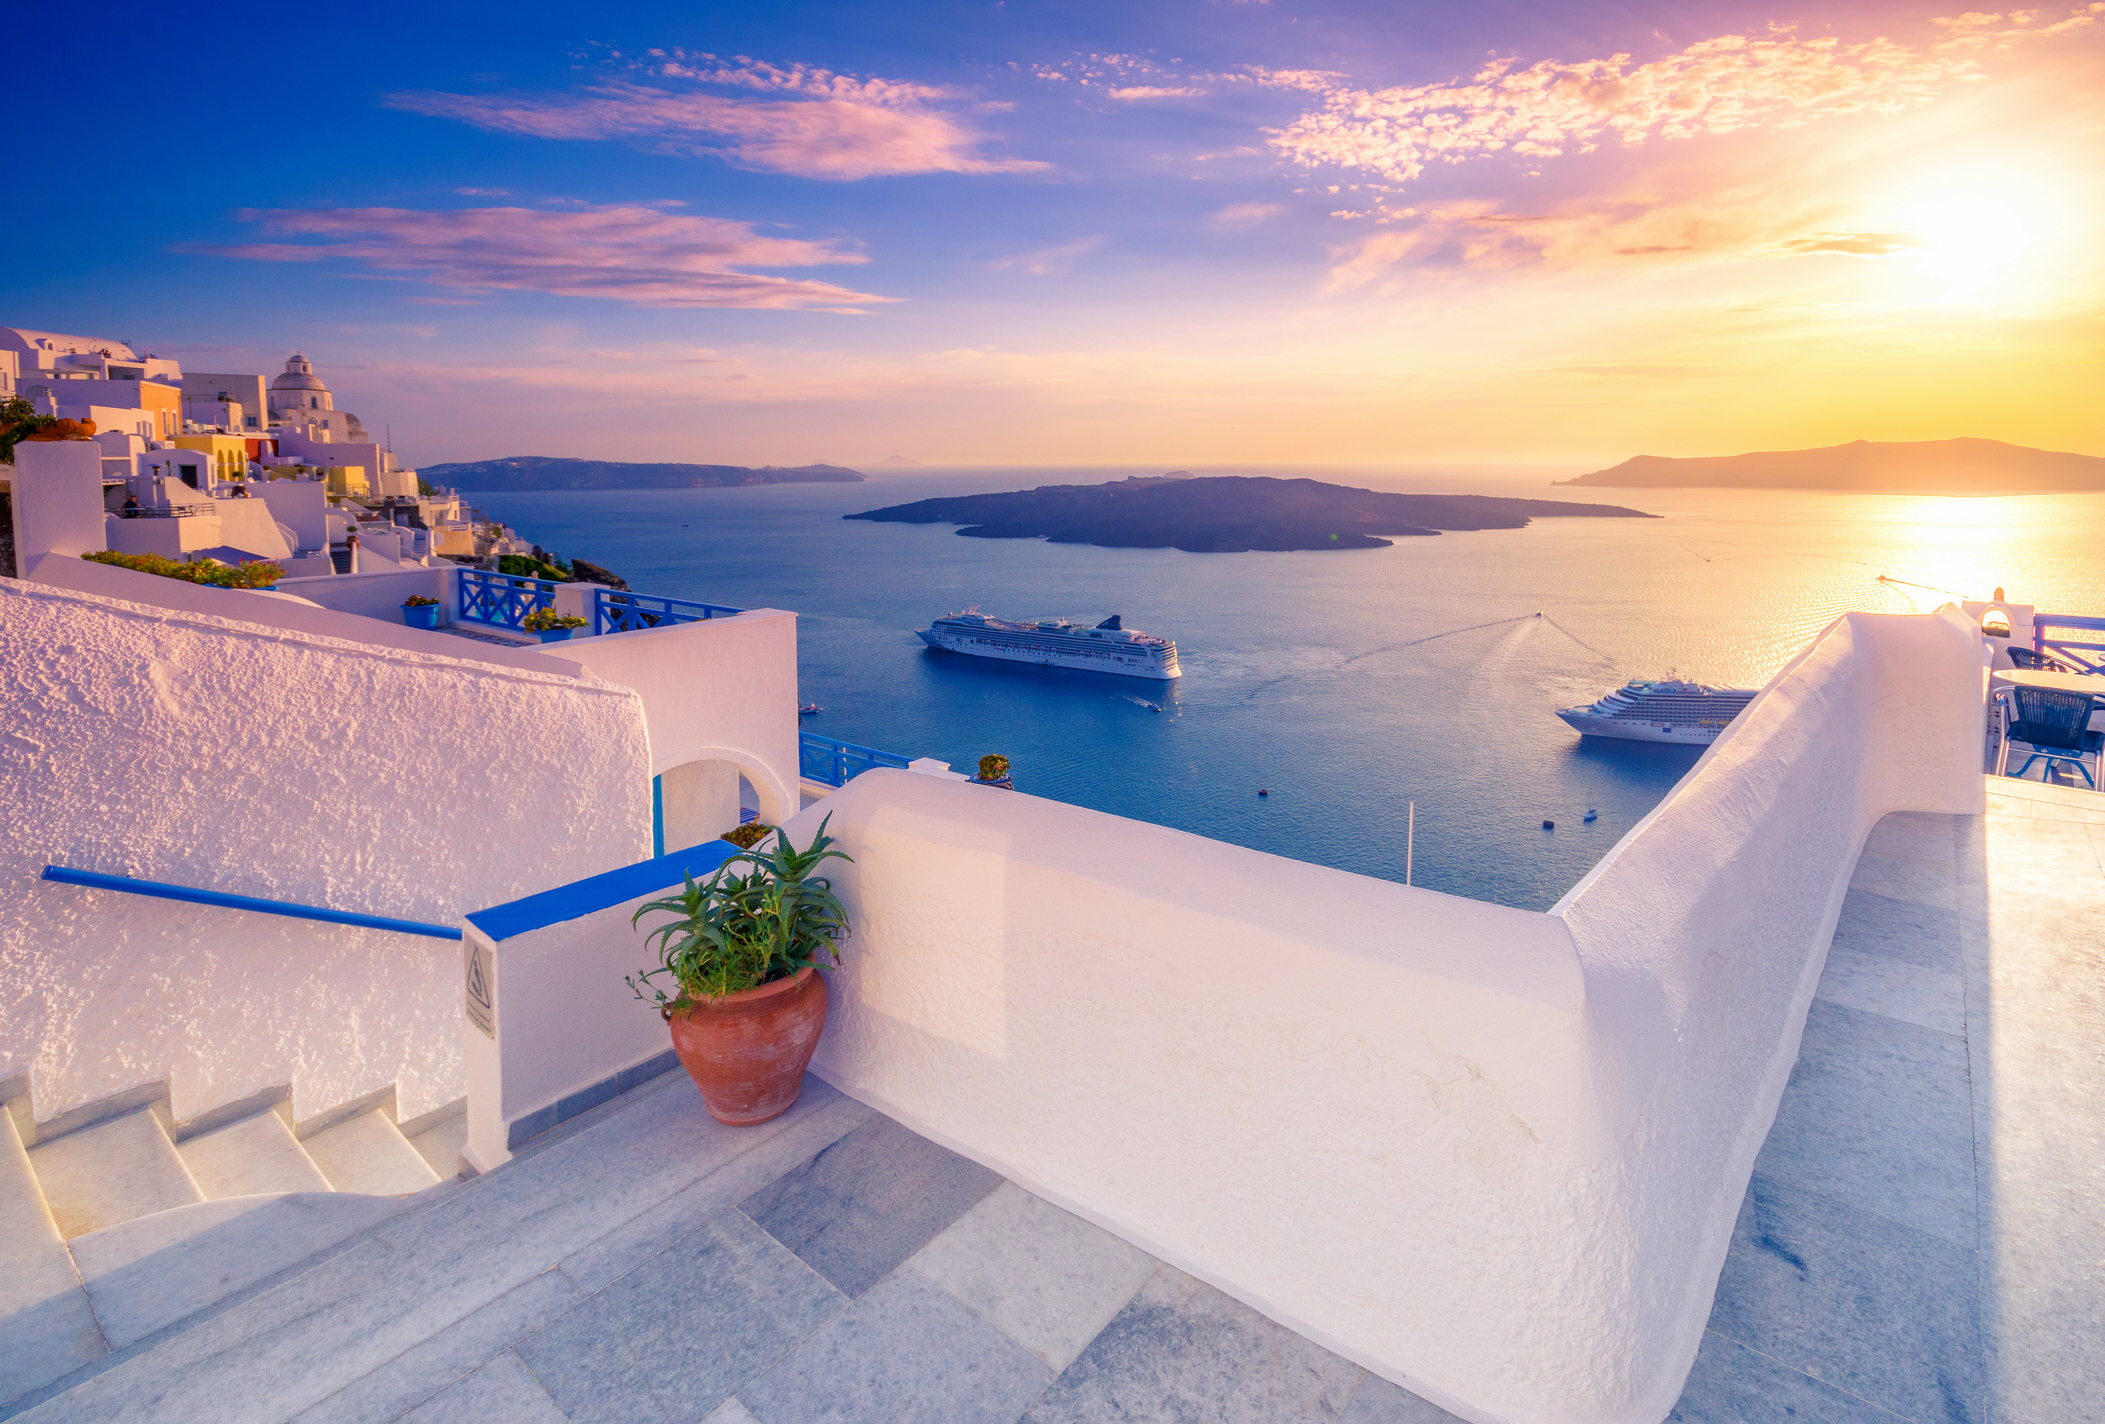 11-day Greece escape with cruise & airfare from $1,799